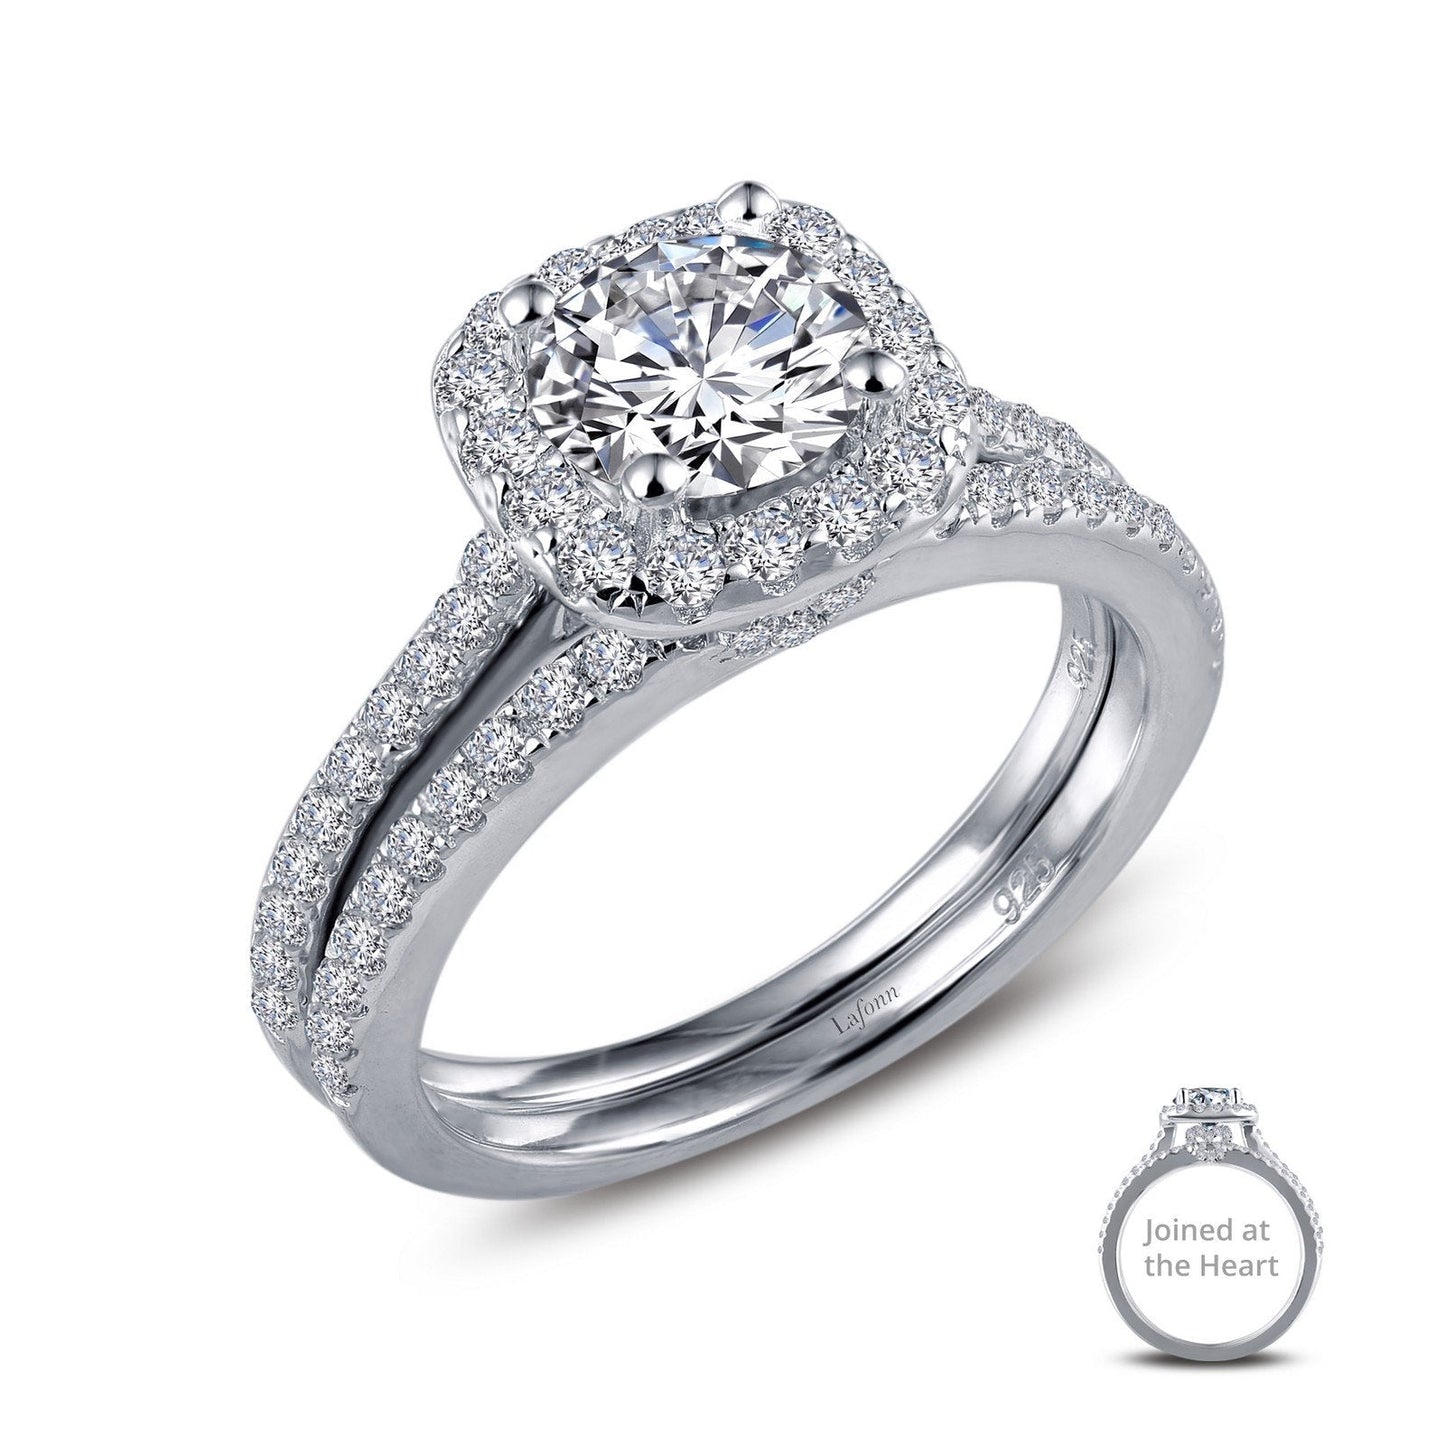 LaFonn Platinum Simulated Diamond Size: 6.50mm Round, Approx. 1.03 CTW RINGS Joined-At-The-Heart Wedding Set